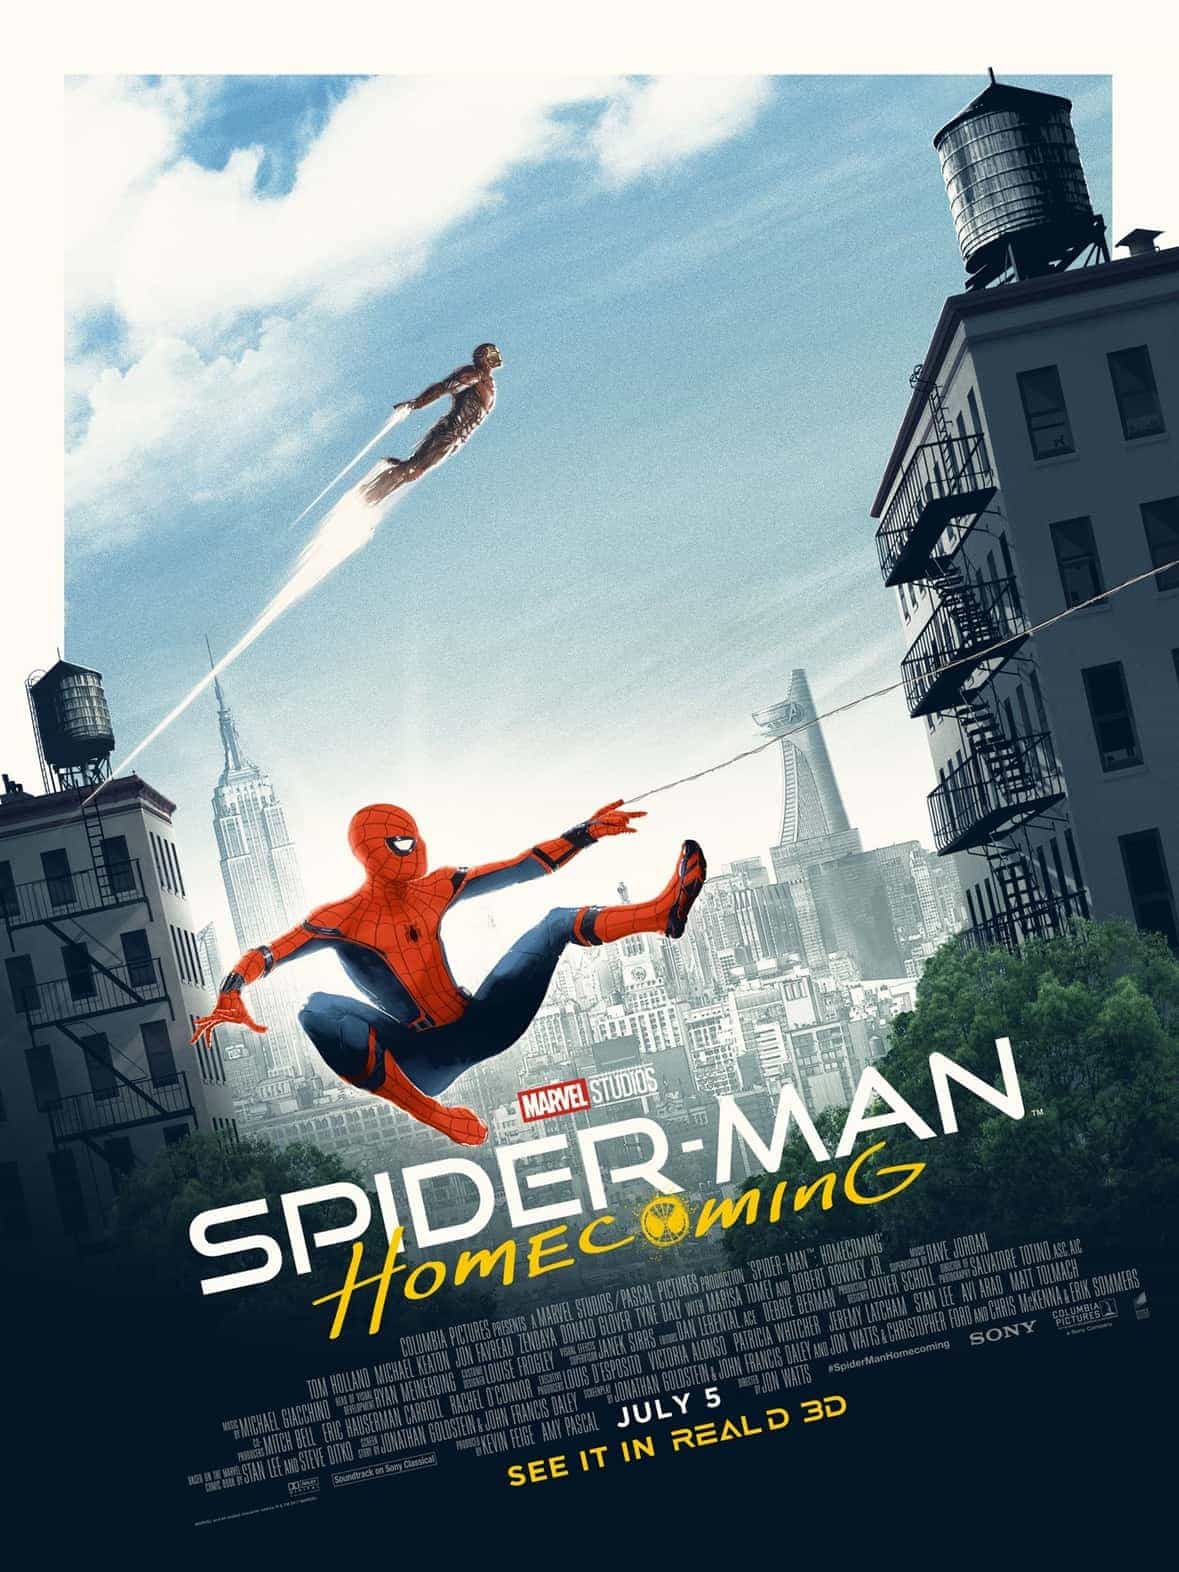 UK Box Office Weekend 7th July 2017:  Spider-Man Homecoming tops the UK chart on its debut weekend